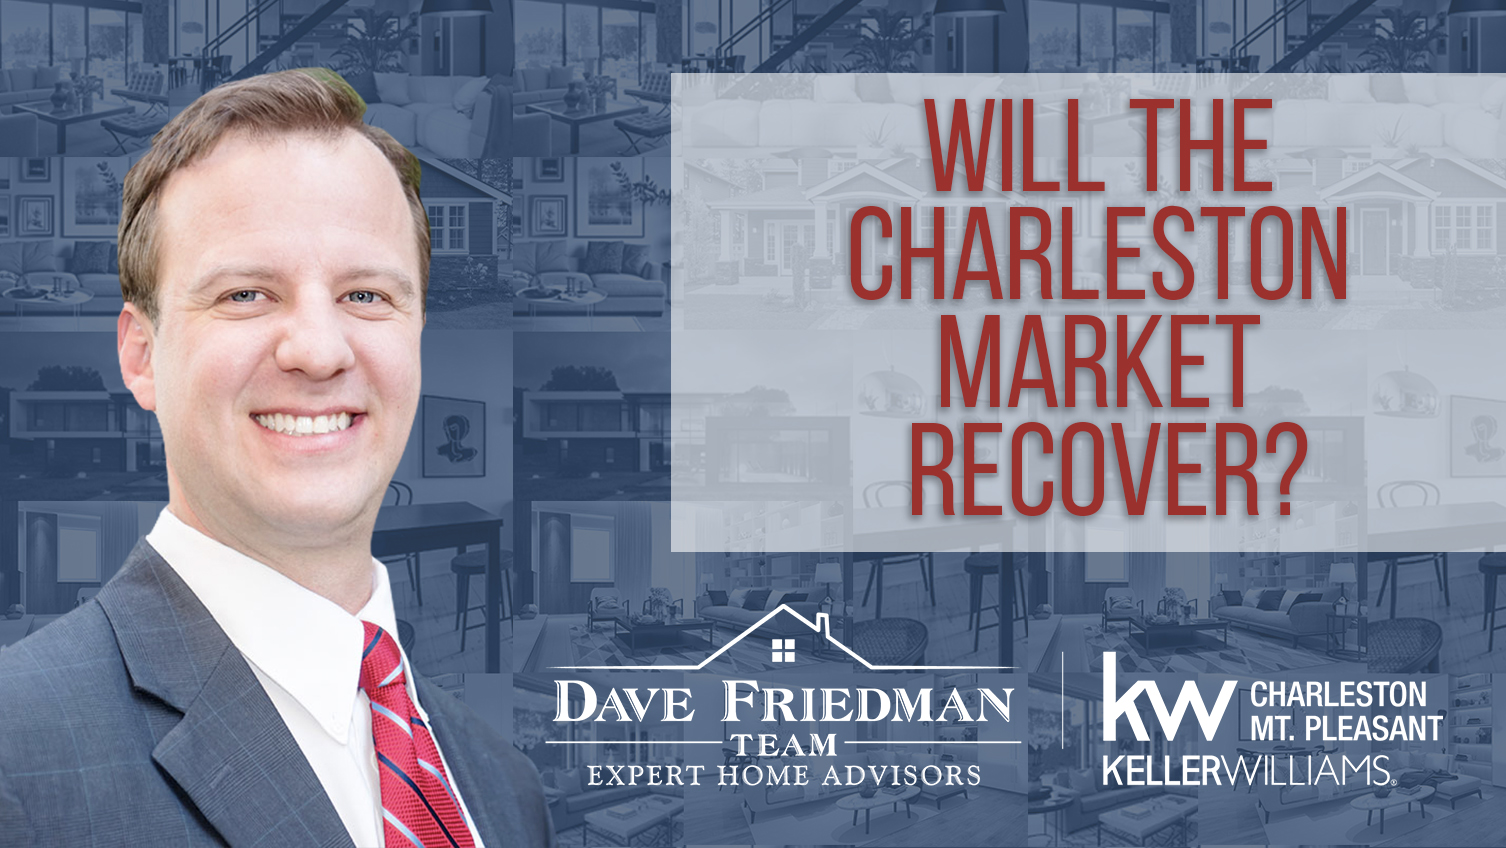 Q: Will the Charleston Market Recover?